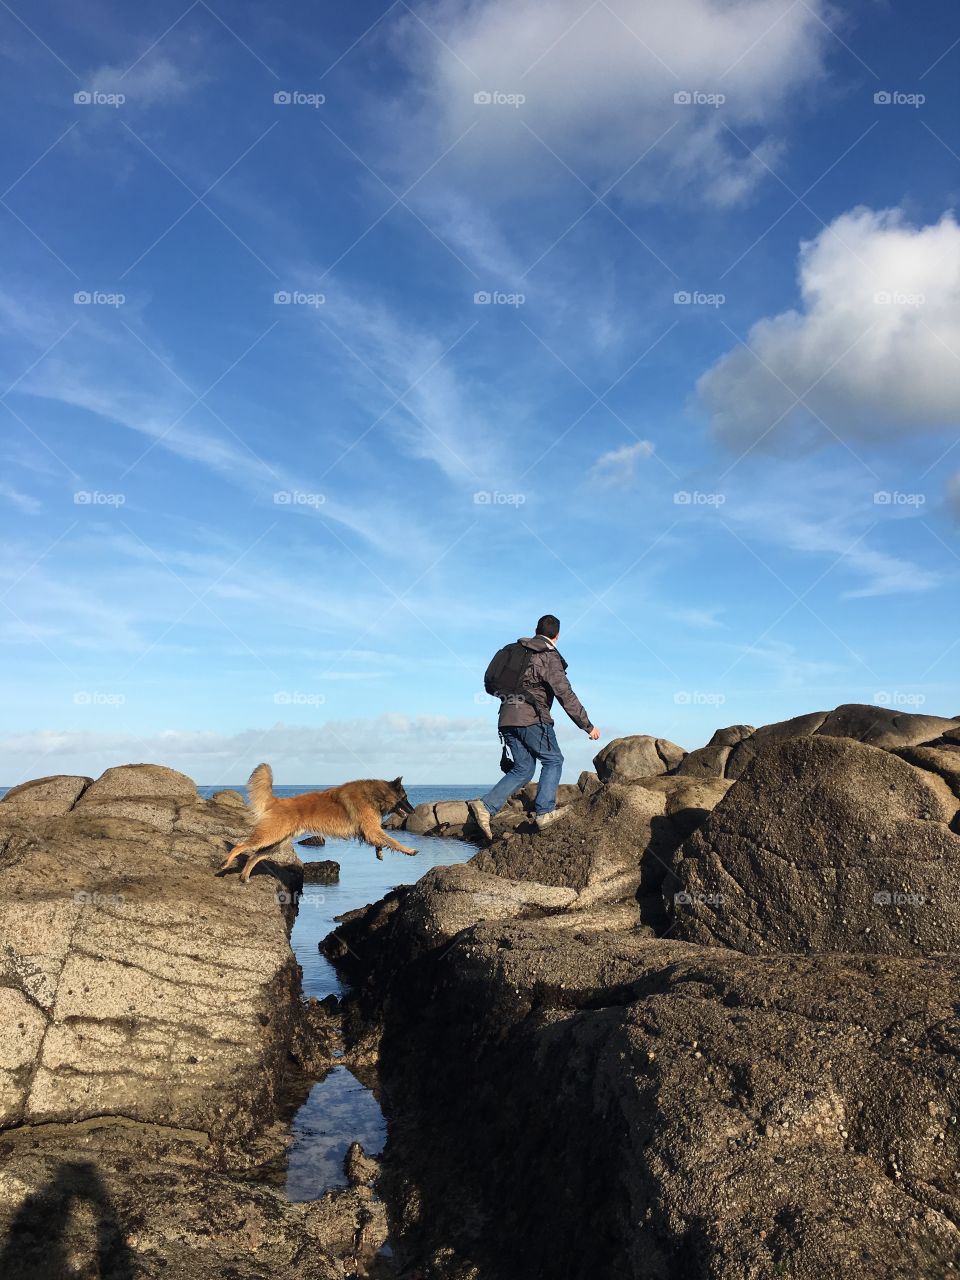 Max the dog, jumping over the rocks with a human friend, Normandy, France